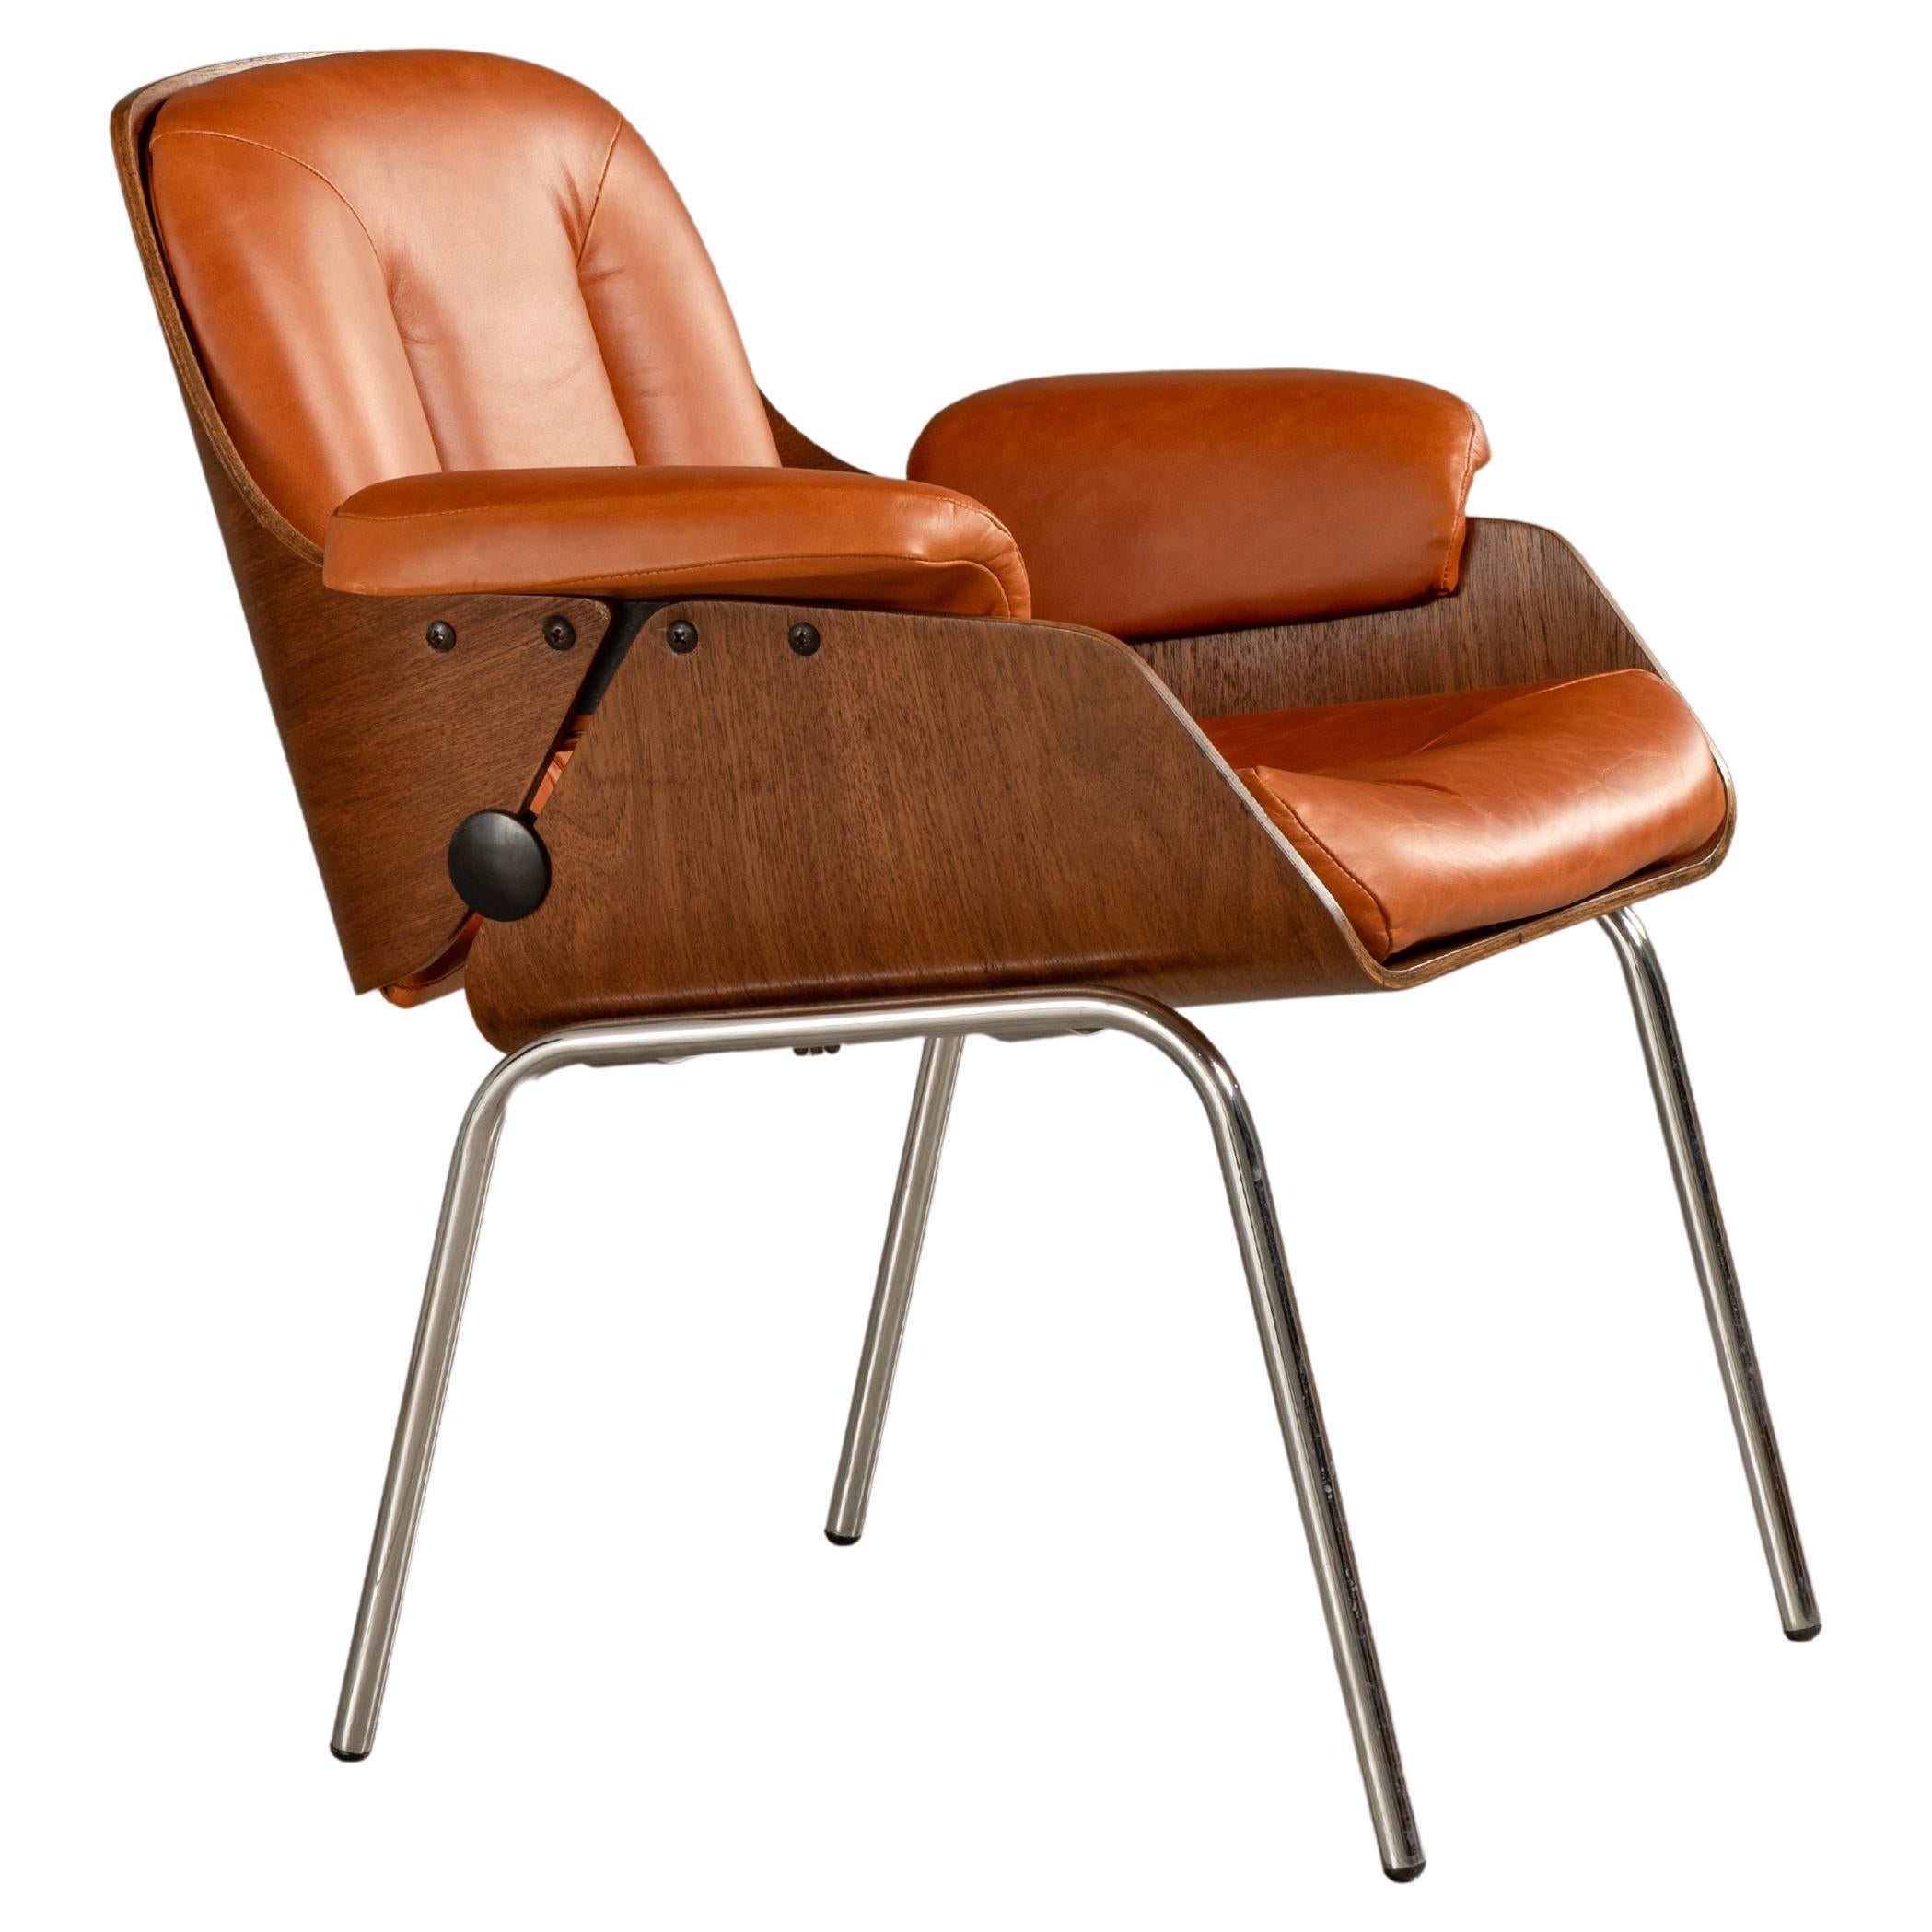 Armchair with Wood, Leather and Steel, by Carlo Fongaro, Brazilian Mid-Century For Sale